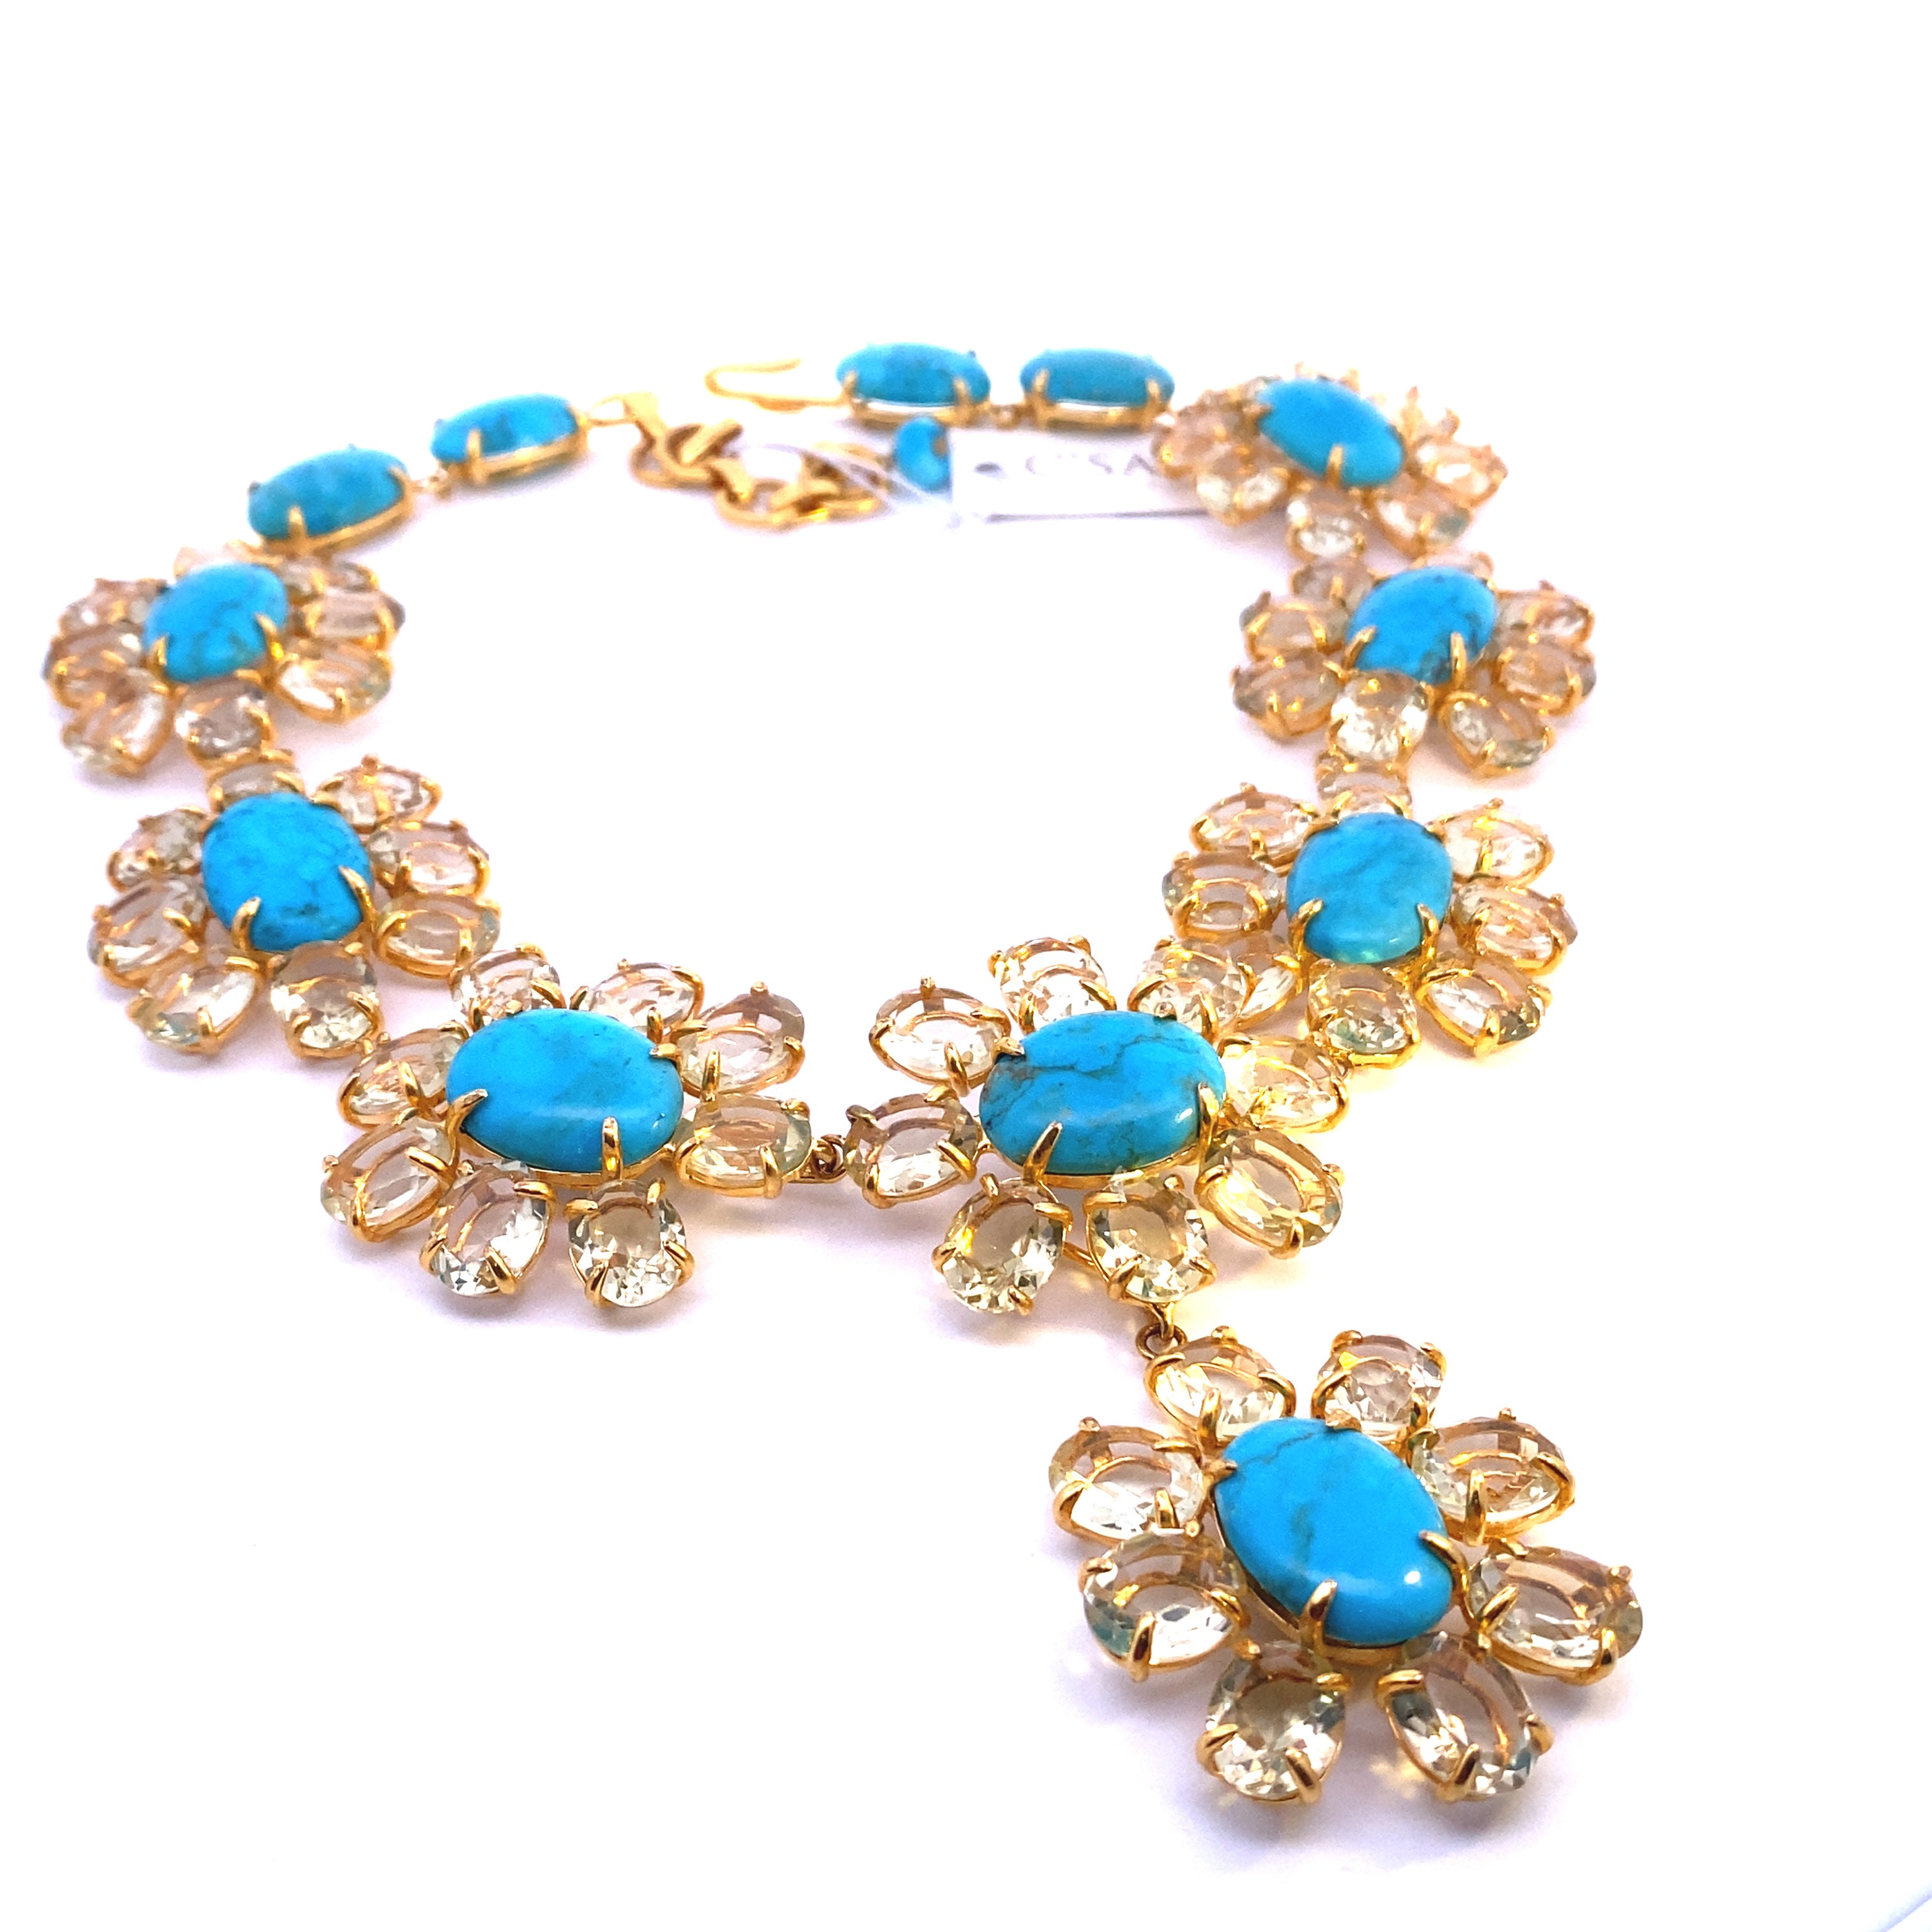 NECKLACE SET WITH FLOWER SHAPE AND TURQUOISE LEMON